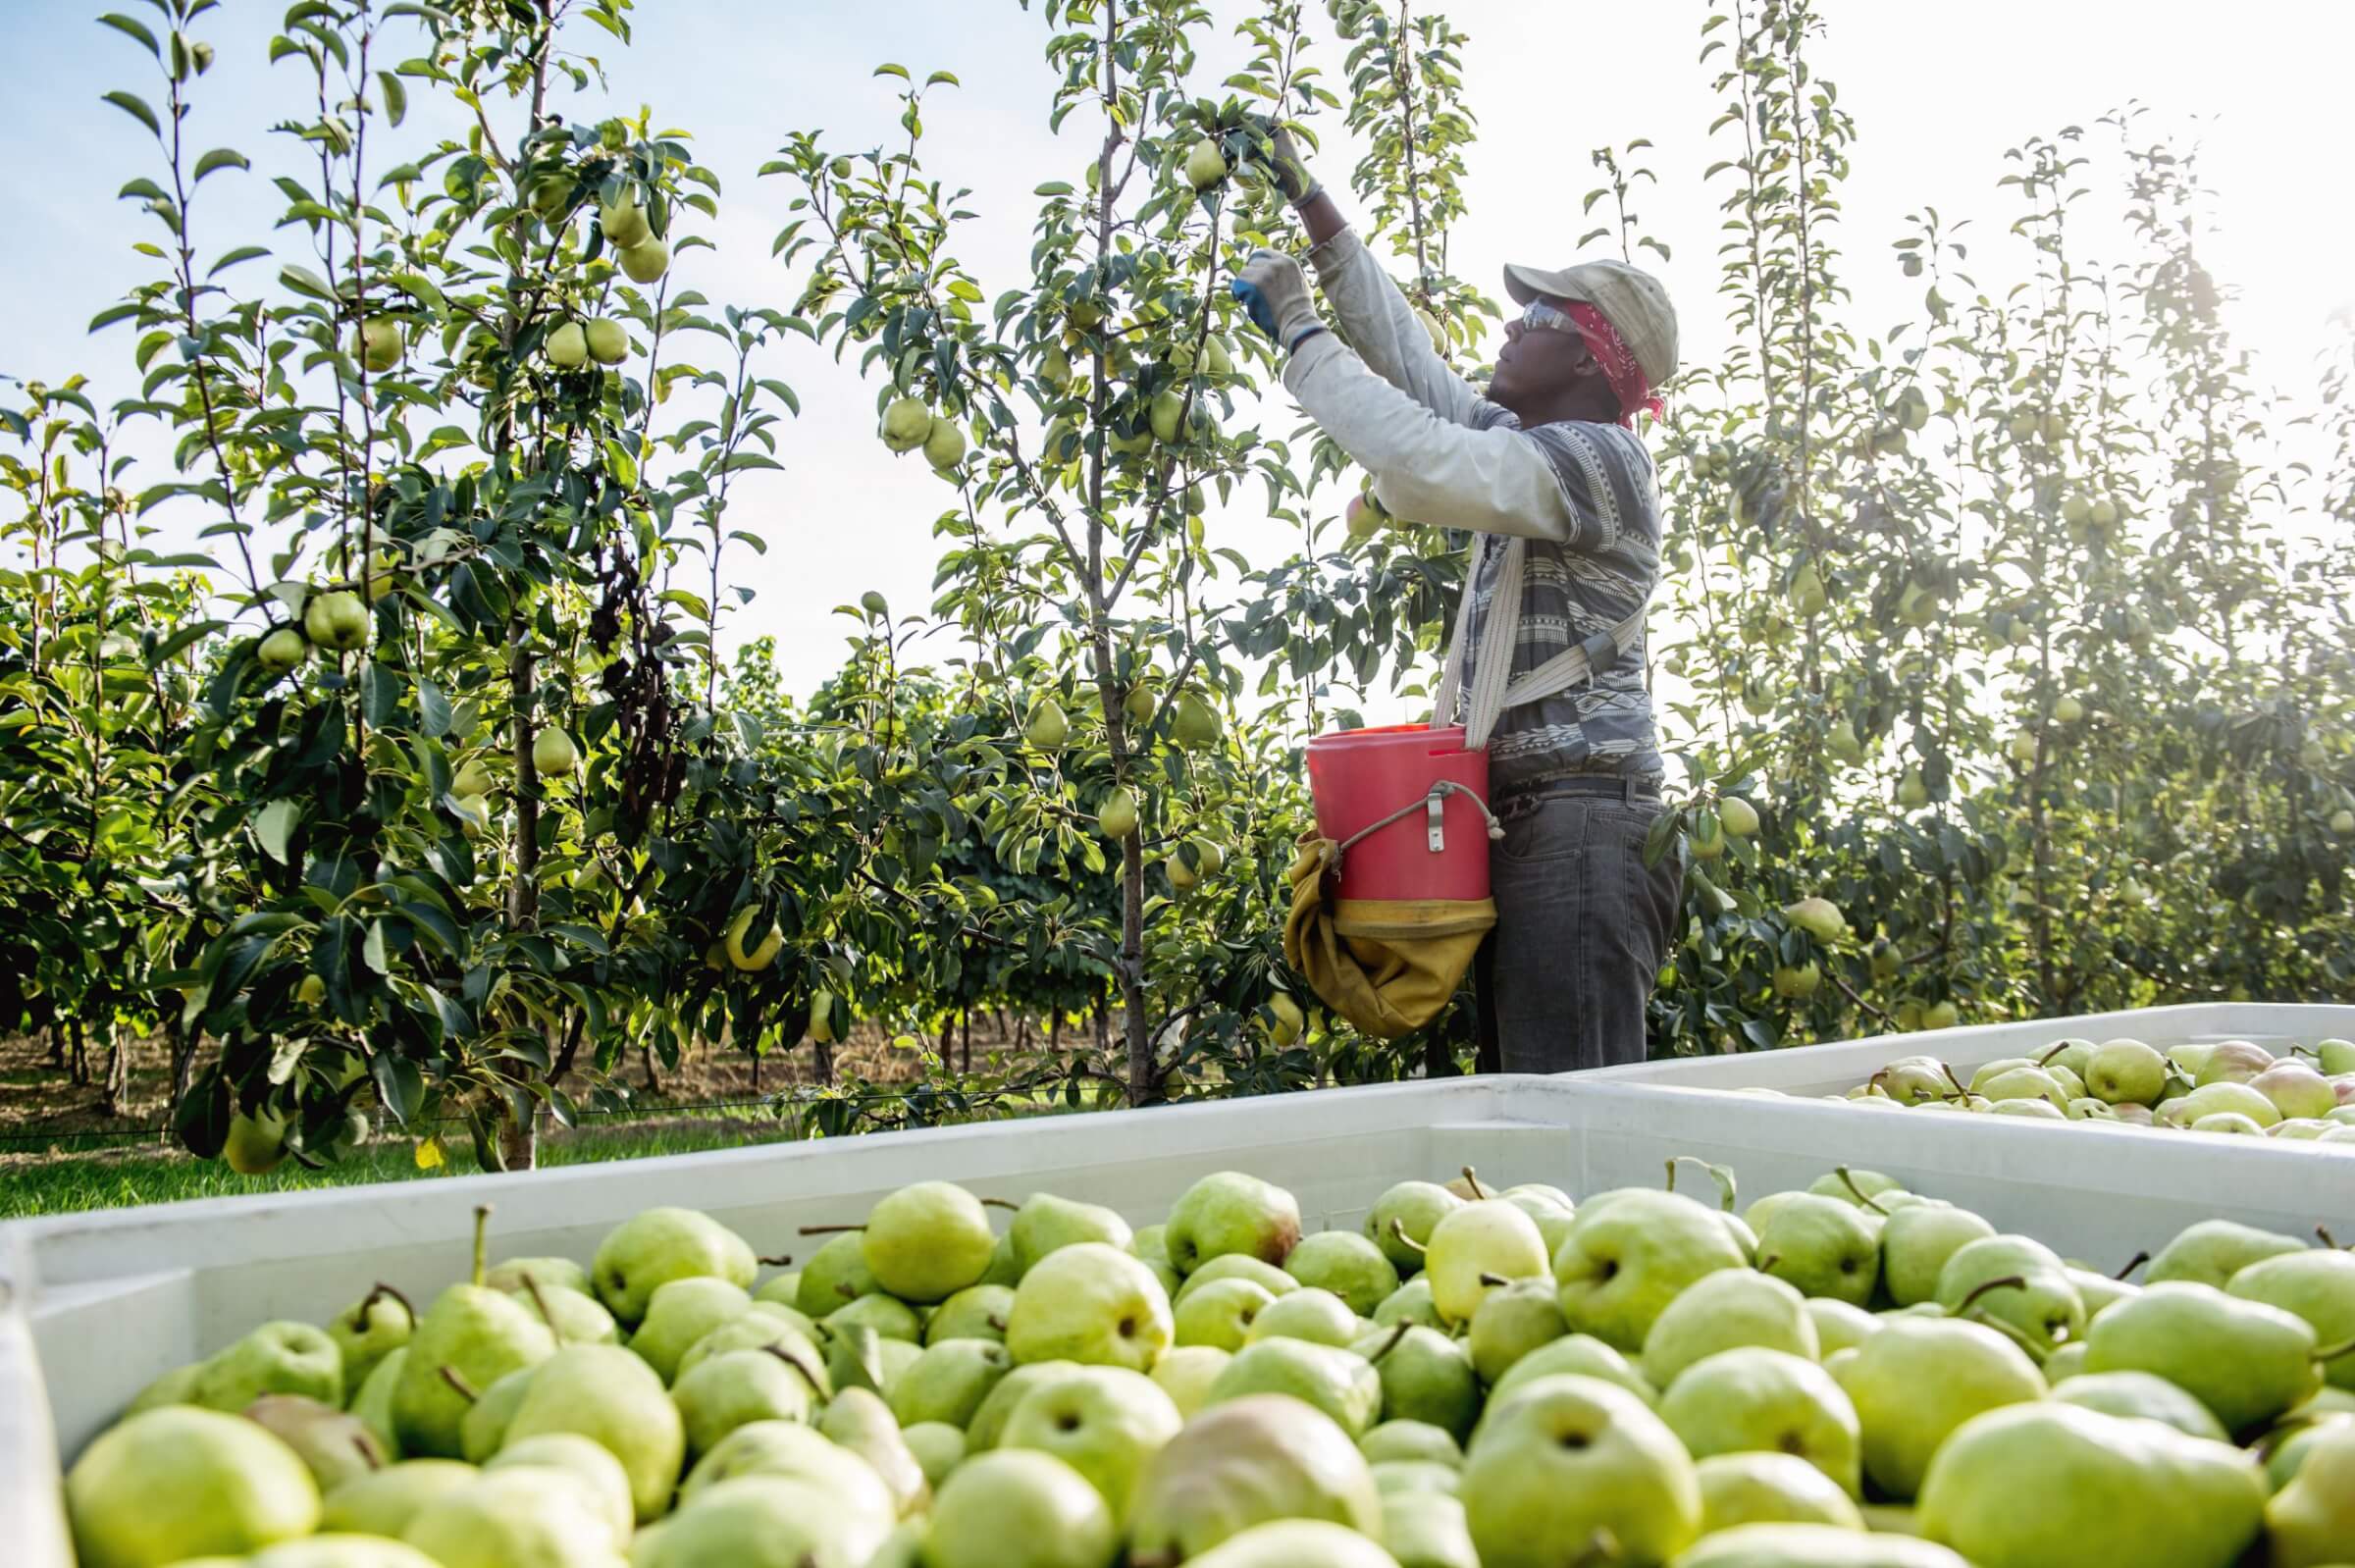 How To Start a Fruit Farming Business In Africa